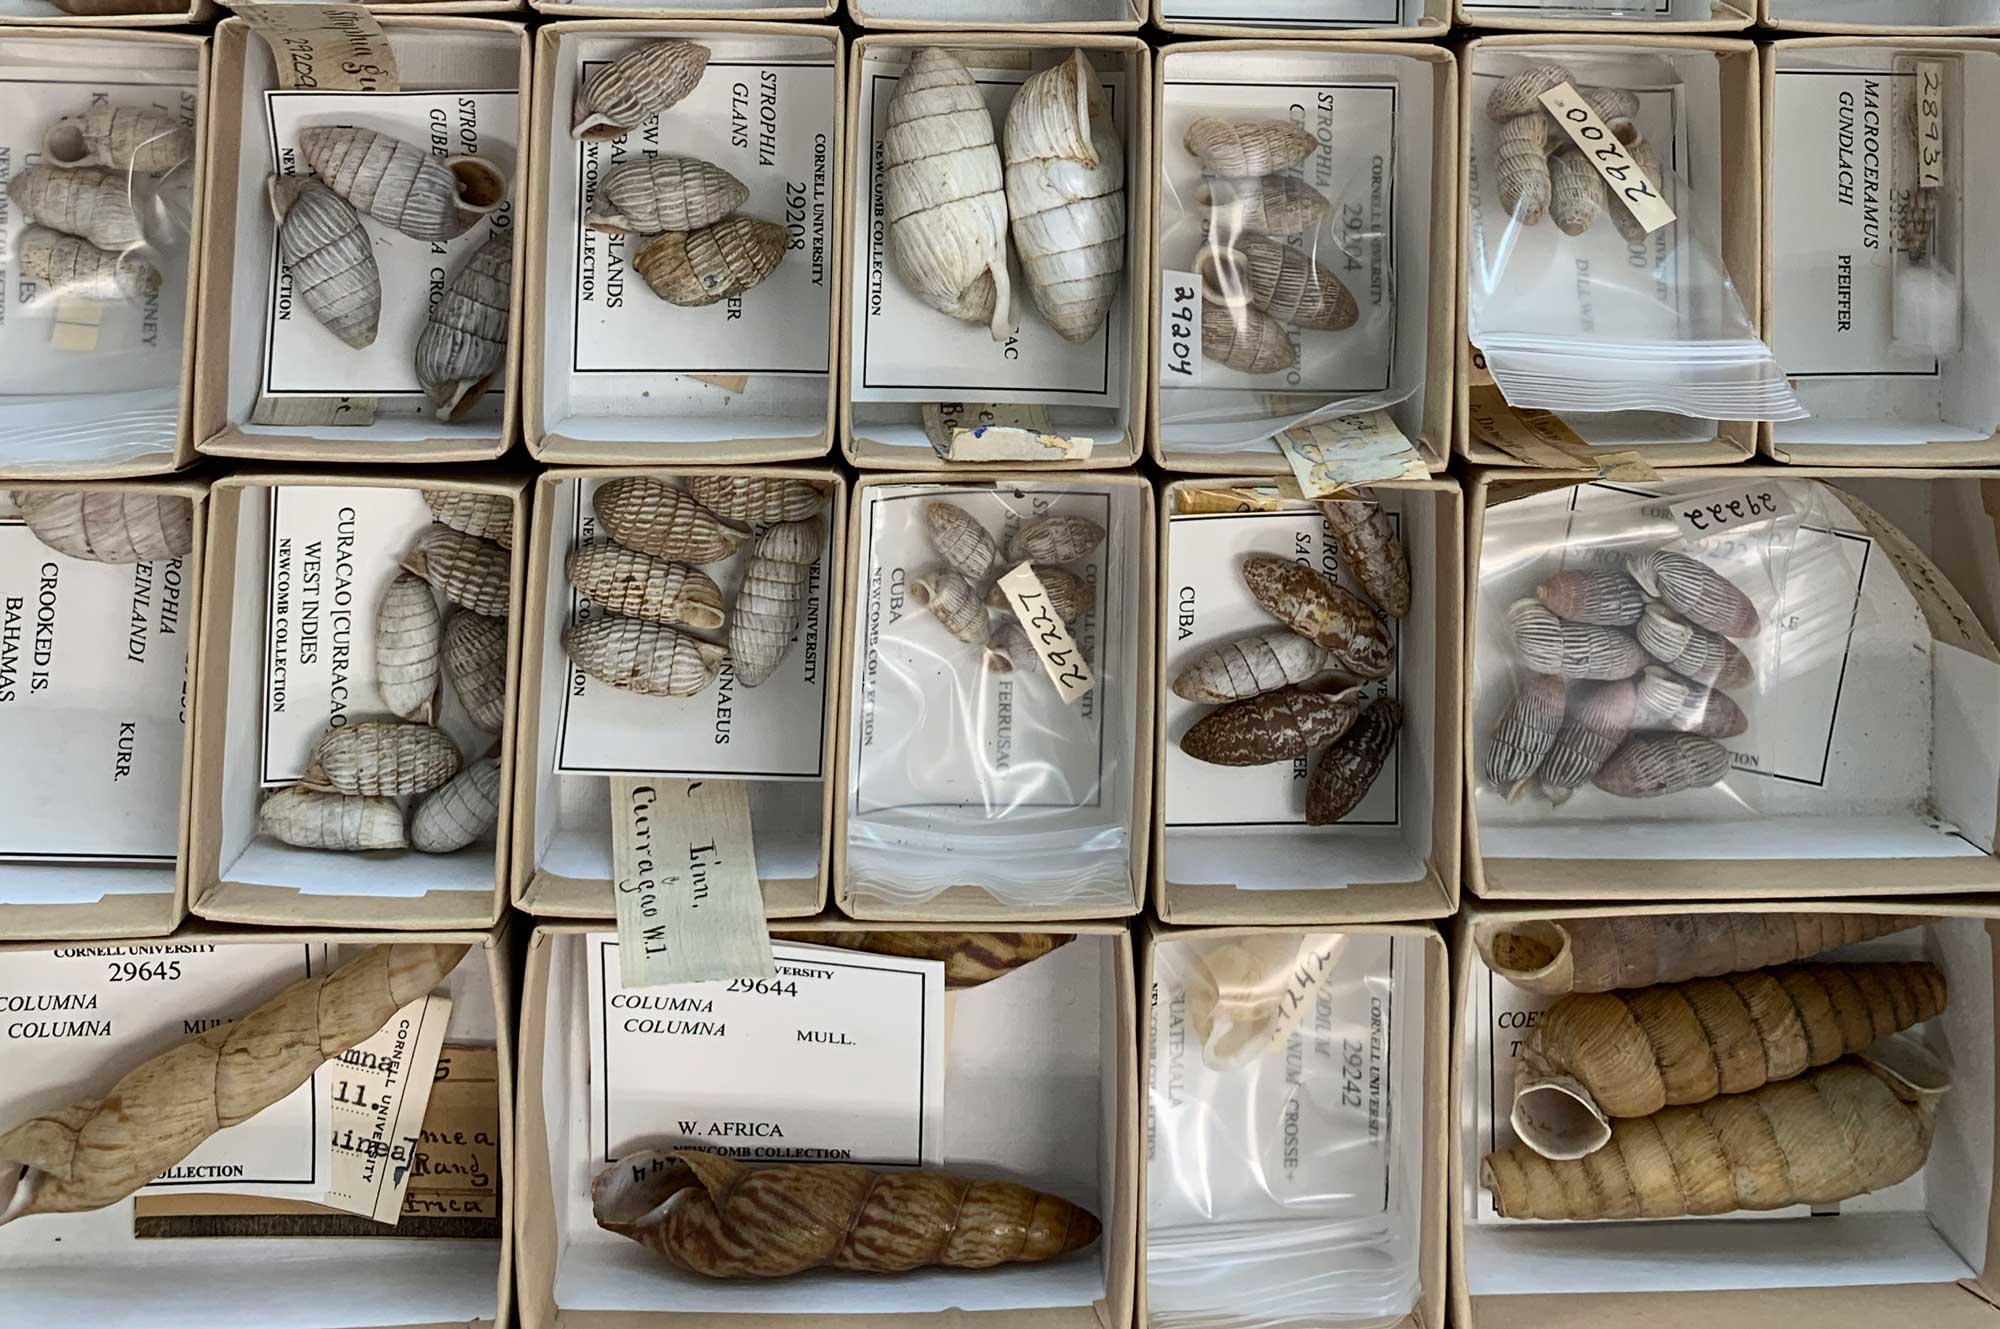 Photograph showing a variety of modern land snail shells in a museum collection.